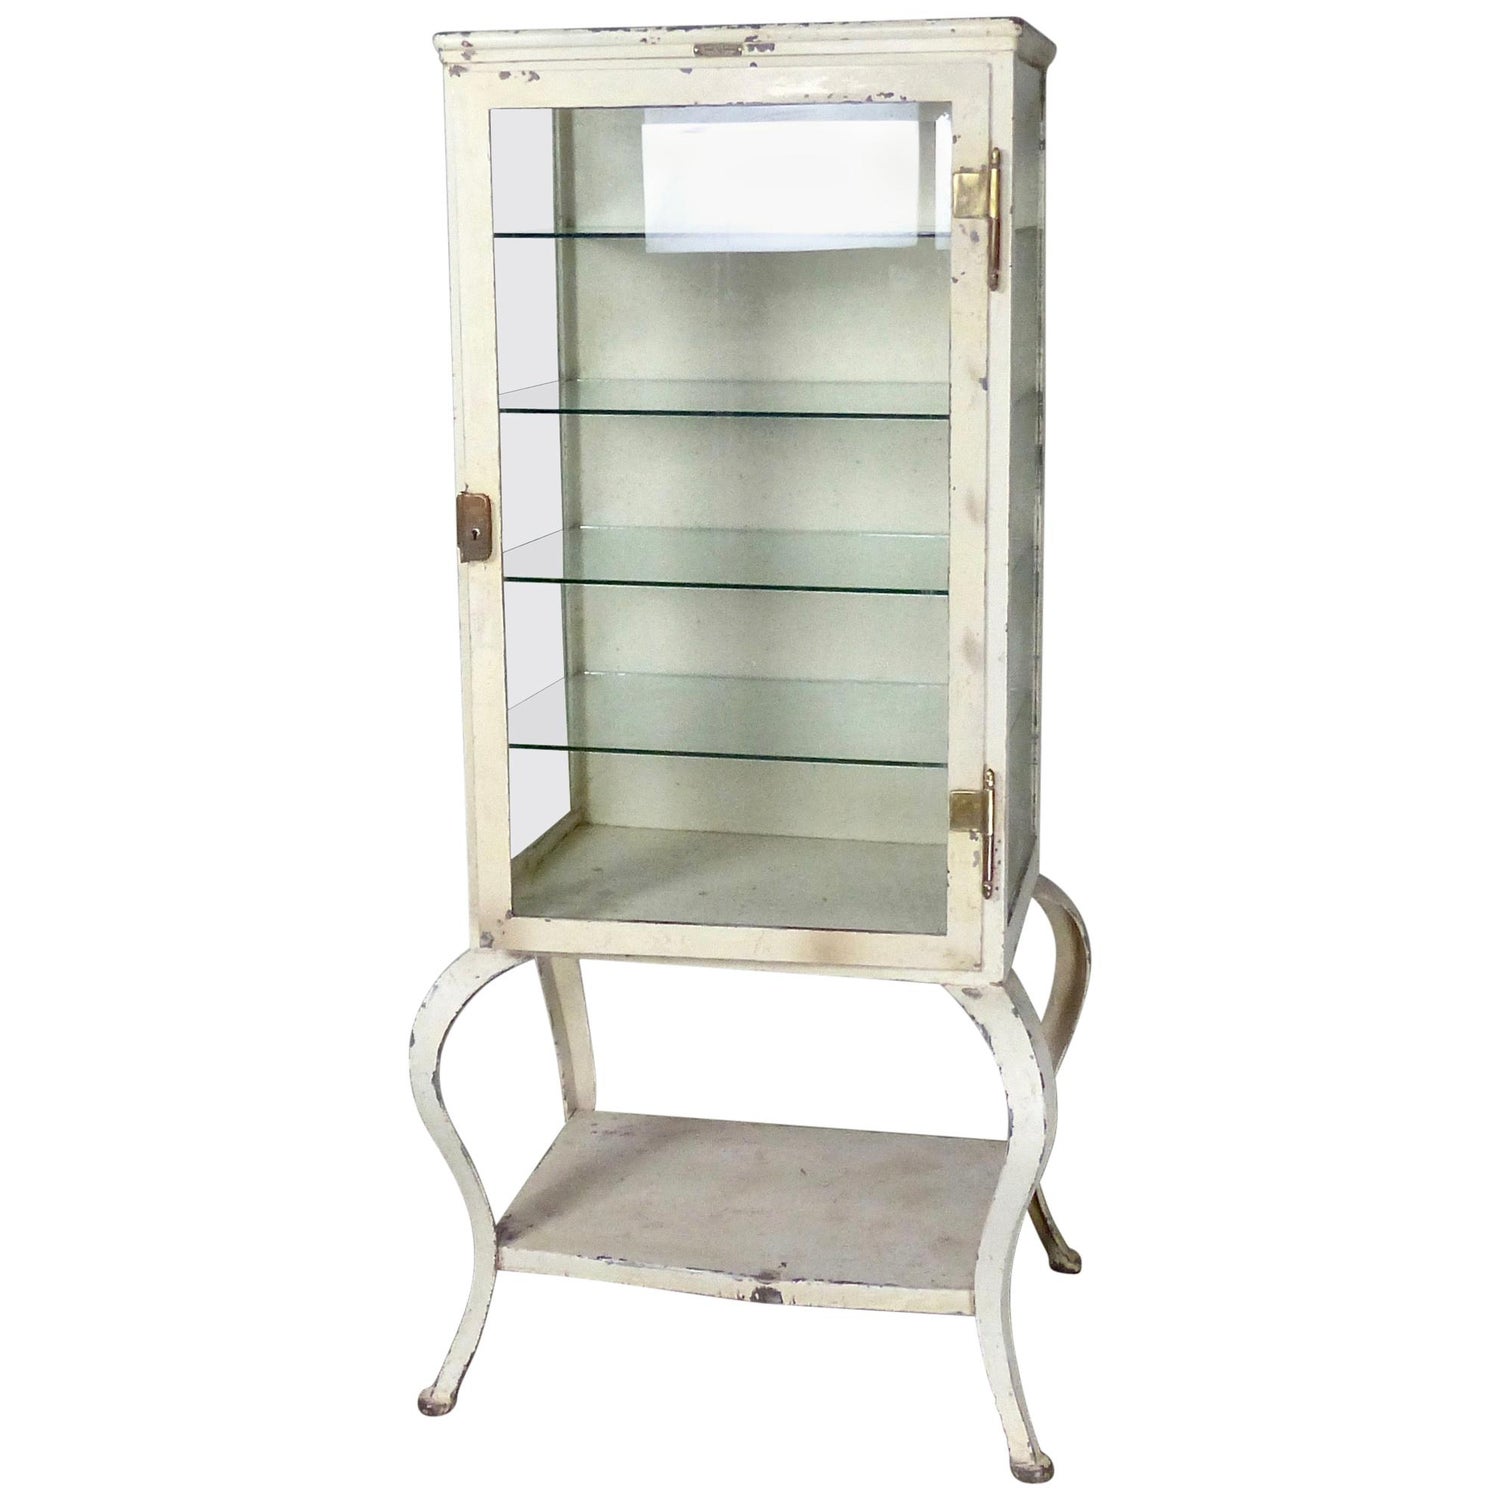 1910 Metal Apothecary Cabinet By M Weiss And Co Newark Nj At